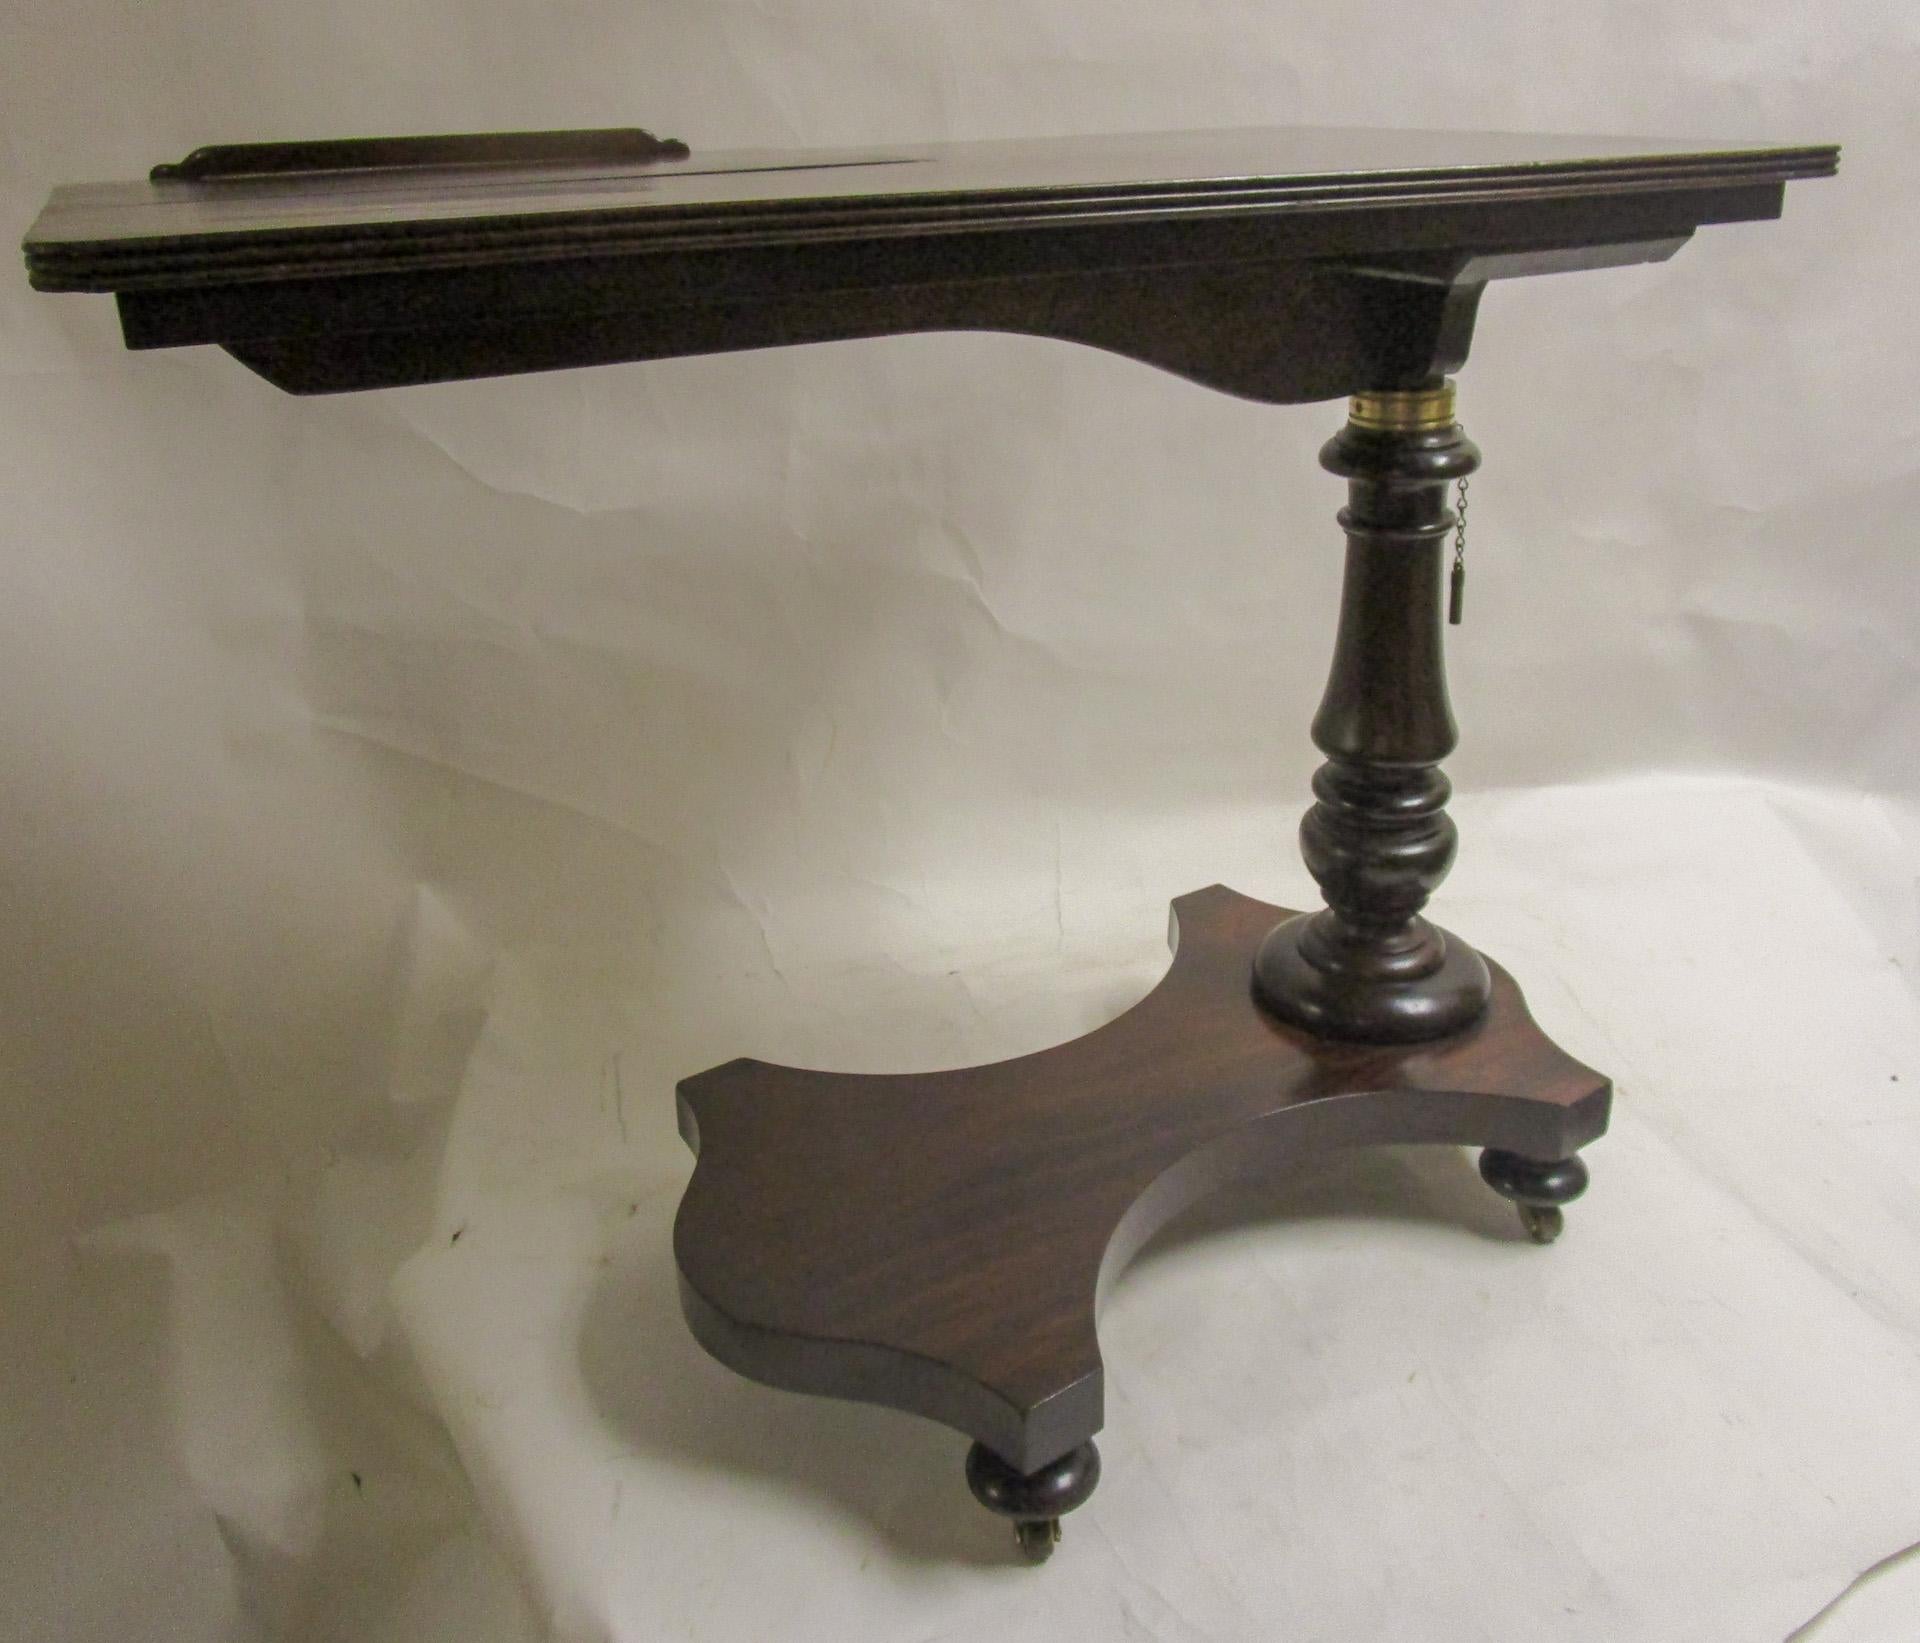 This handsome piece consists of two sections on a lifting ratchet, a fine mahogany Regency period reading/writing table featuring an adjustable top over a substantial base support. Retains the original mechanism to adjust the tray. The slanted book